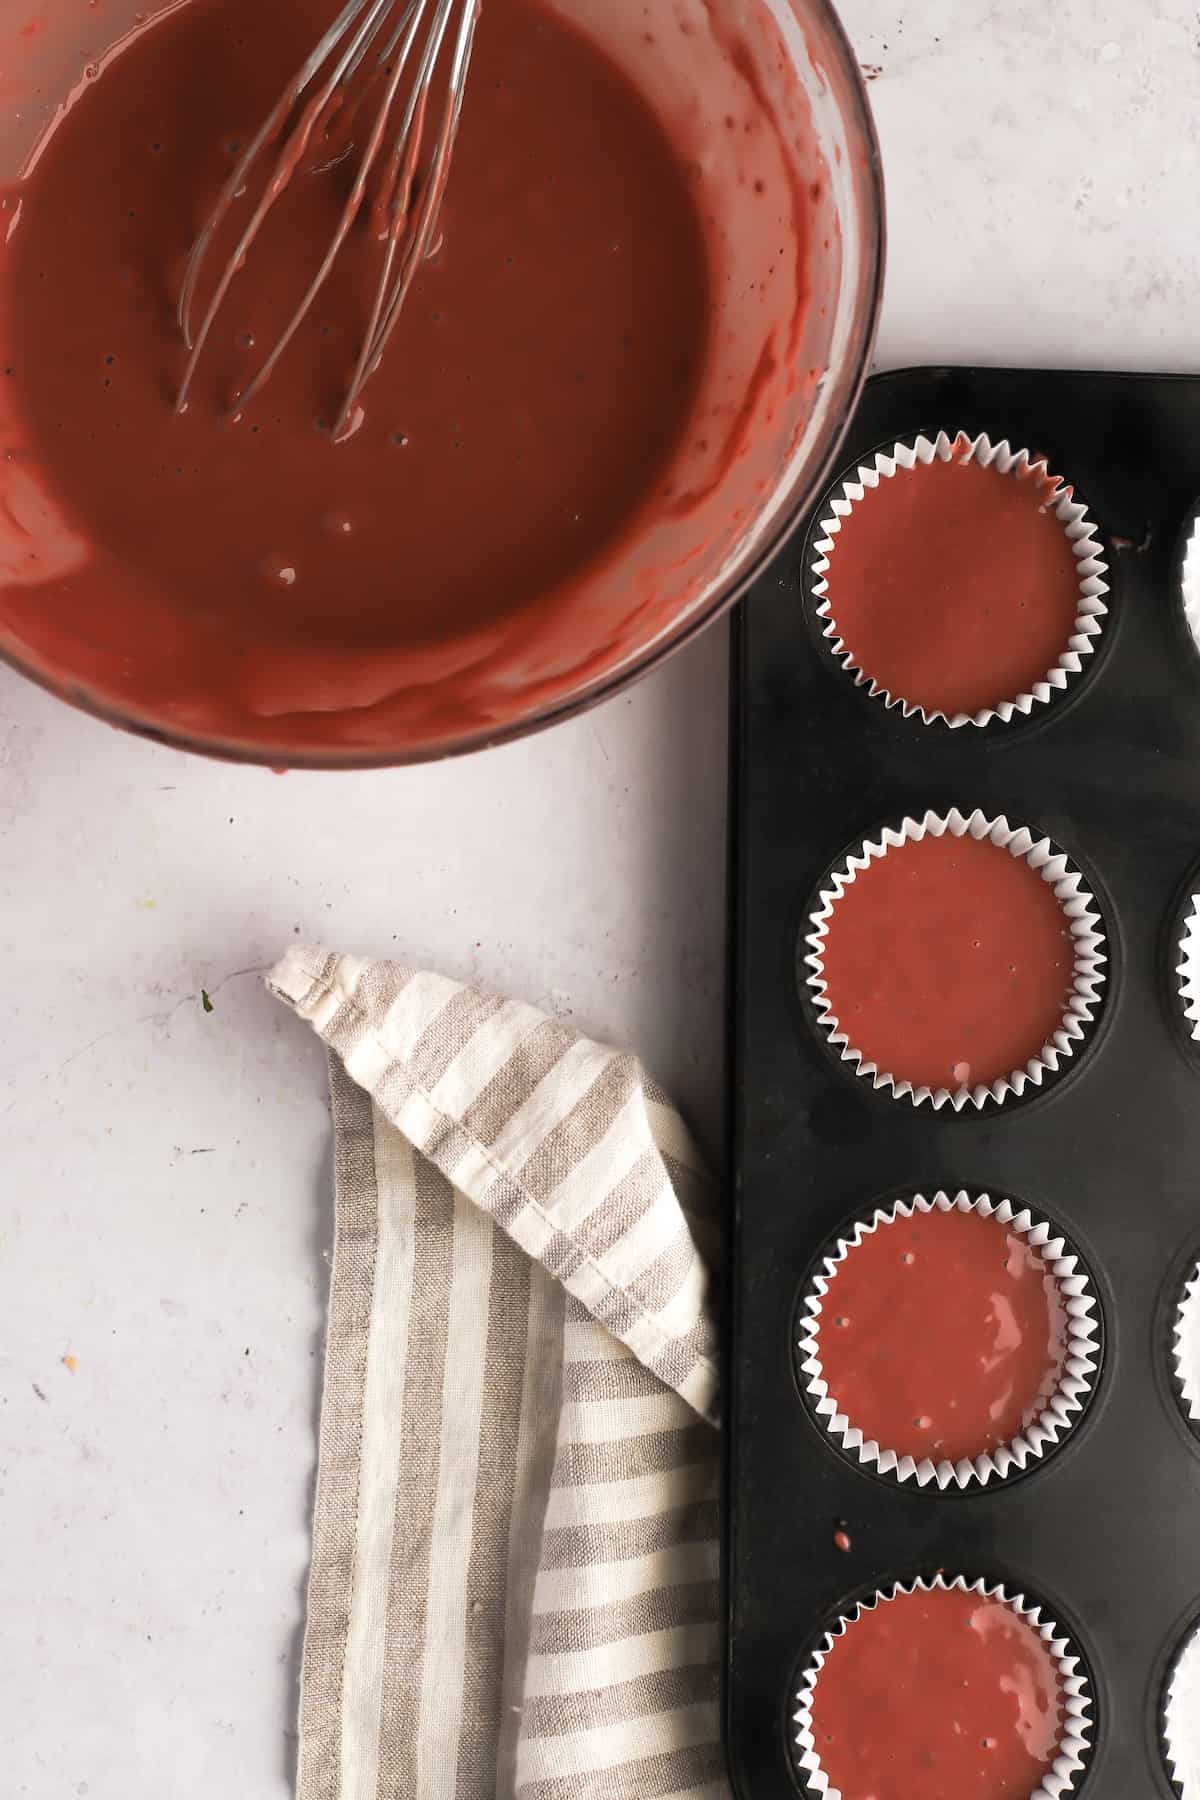 cupcake pan filled with red velvet batter and a mixing bowl of more batter